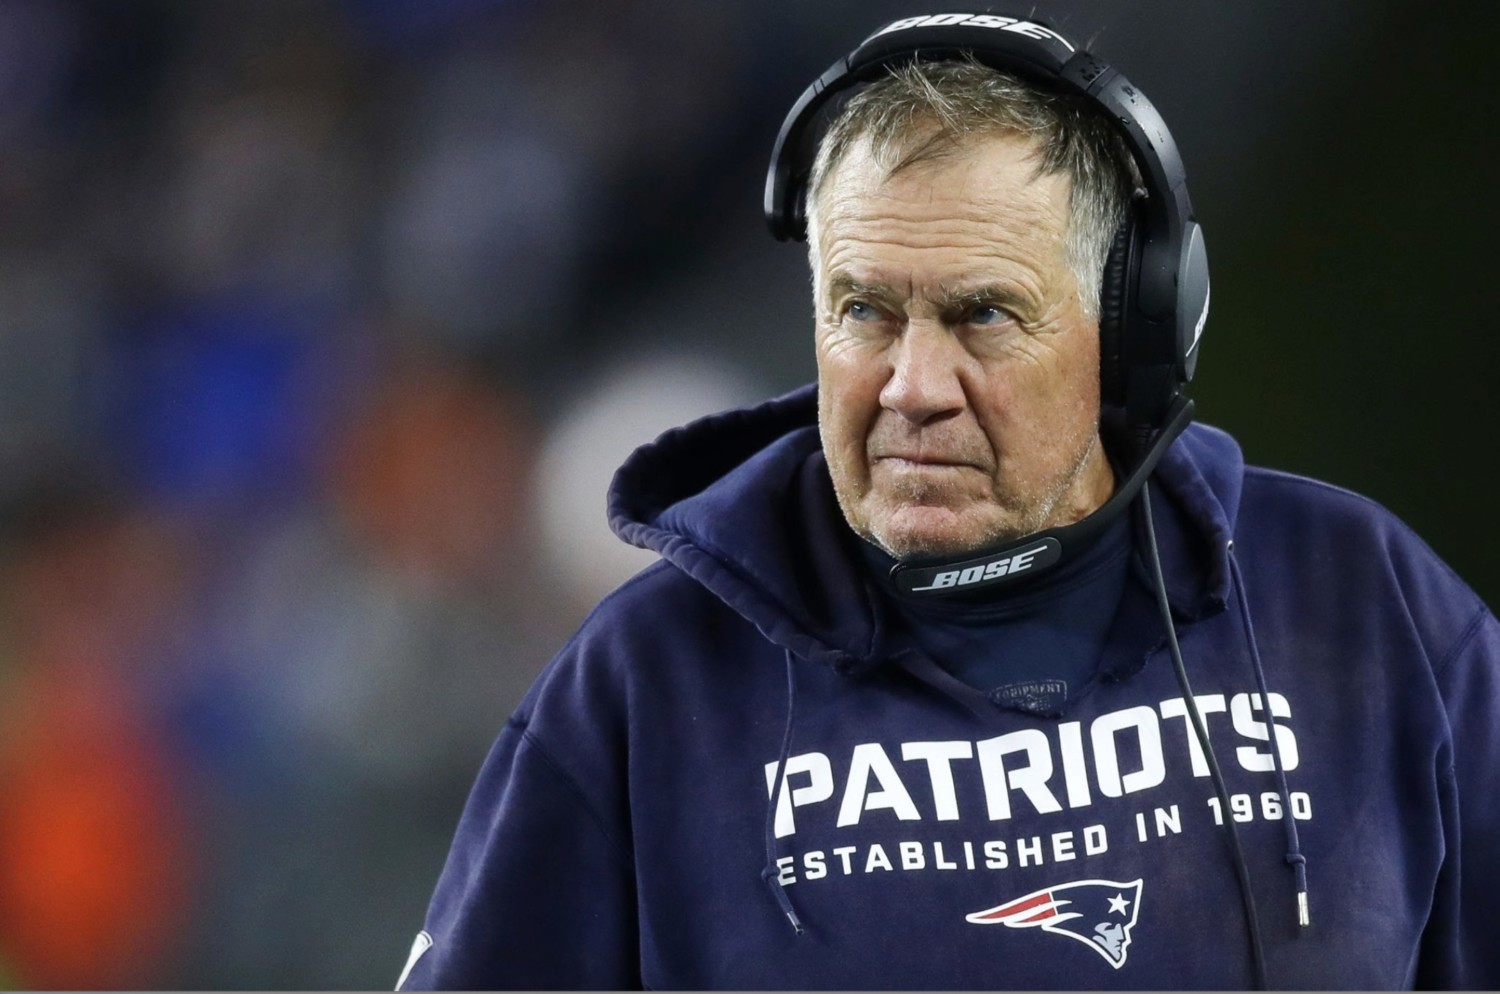 GUT CHECK WITH BELICHICK